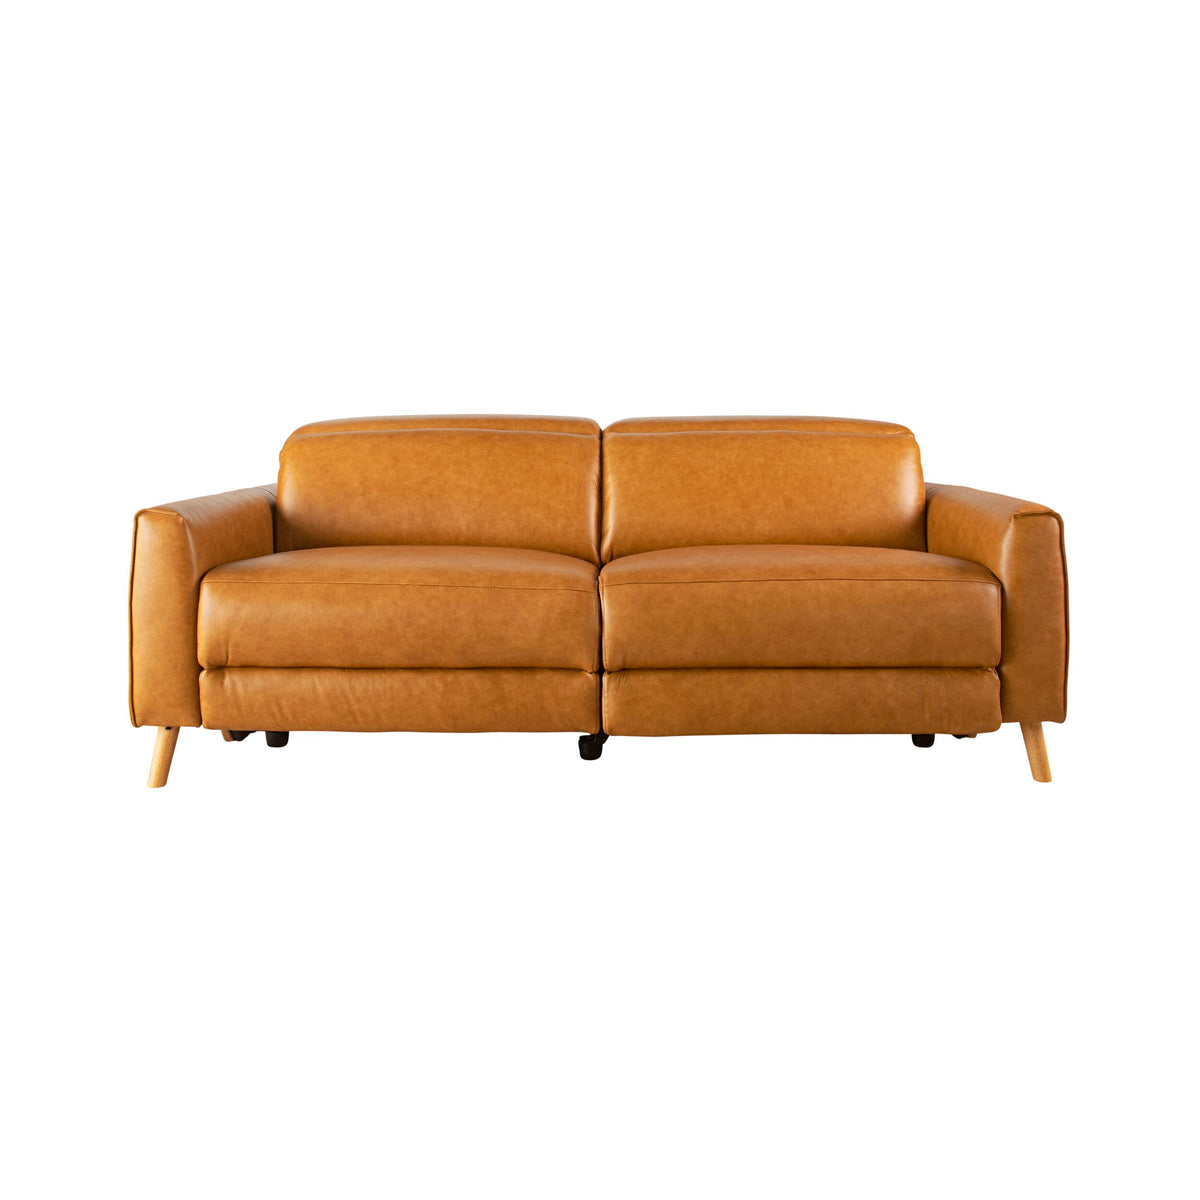 Dunaway 2 Seater Leather Recliner Sofa Vintage Tan – Early Settler AU